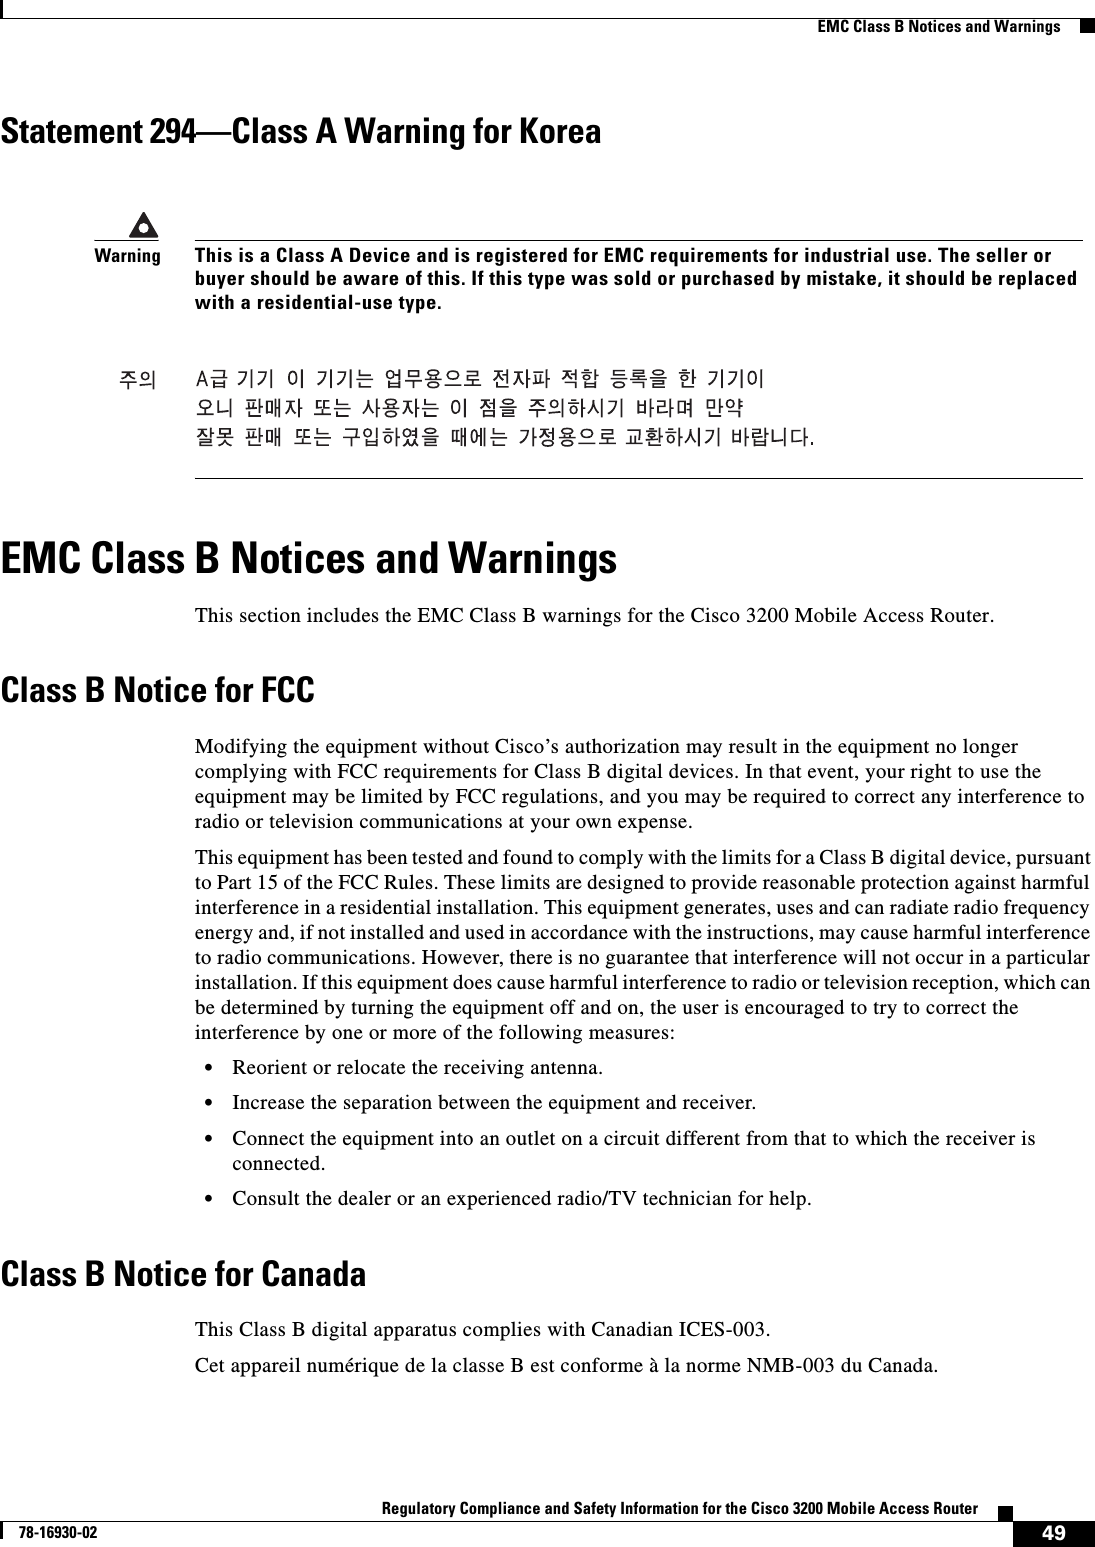 49Regulatory Compliance and Safety Information for the Cisco 3200 Mobile Access Router78-16930-02  EMC Class B Notices and WarningsStatement 294—Class A Warning for KoreaEMC Class B Notices and WarningsThis section includes the EMC Class B warnings for the Cisco 3200 Mobile Access Router.Class B Notice for FCCModifying the equipment without Cisco’s authorization may result in the equipment no longer complying with FCC requirements for Class B digital devices. In that event, your right to use the equipment may be limited by FCC regulations, and you may be required to correct any interference to radio or television communications at your own expense.This equipment has been tested and found to comply with the limits for a Class B digital device, pursuant to Part 15 of the FCC Rules. These limits are designed to provide reasonable protection against harmful interference in a residential installation. This equipment generates, uses and can radiate radio frequency energy and, if not installed and used in accordance with the instructions, may cause harmful interference to radio communications. However, there is no guarantee that interference will not occur in a particular installation. If this equipment does cause harmful interference to radio or television reception, which can be determined by turning the equipment off and on, the user is encouraged to try to correct the interference by one or more of the following measures: •Reorient or relocate the receiving antenna. •Increase the separation between the equipment and receiver.•Connect the equipment into an outlet on a circuit different from that to which the receiver is connected.•Consult the dealer or an experienced radio/TV technician for help. Class B Notice for CanadaThis Class B digital apparatus complies with Canadian ICES-003.Cet appareil numérique de la classe B est conforme à la norme NMB-003 du Canada.WarningThis is a Class A Device and is registered for EMC requirements for industrial use. The seller or buyer should be aware of this. If this type was sold or purchased by mistake, it should be replaced with a residential-use type.